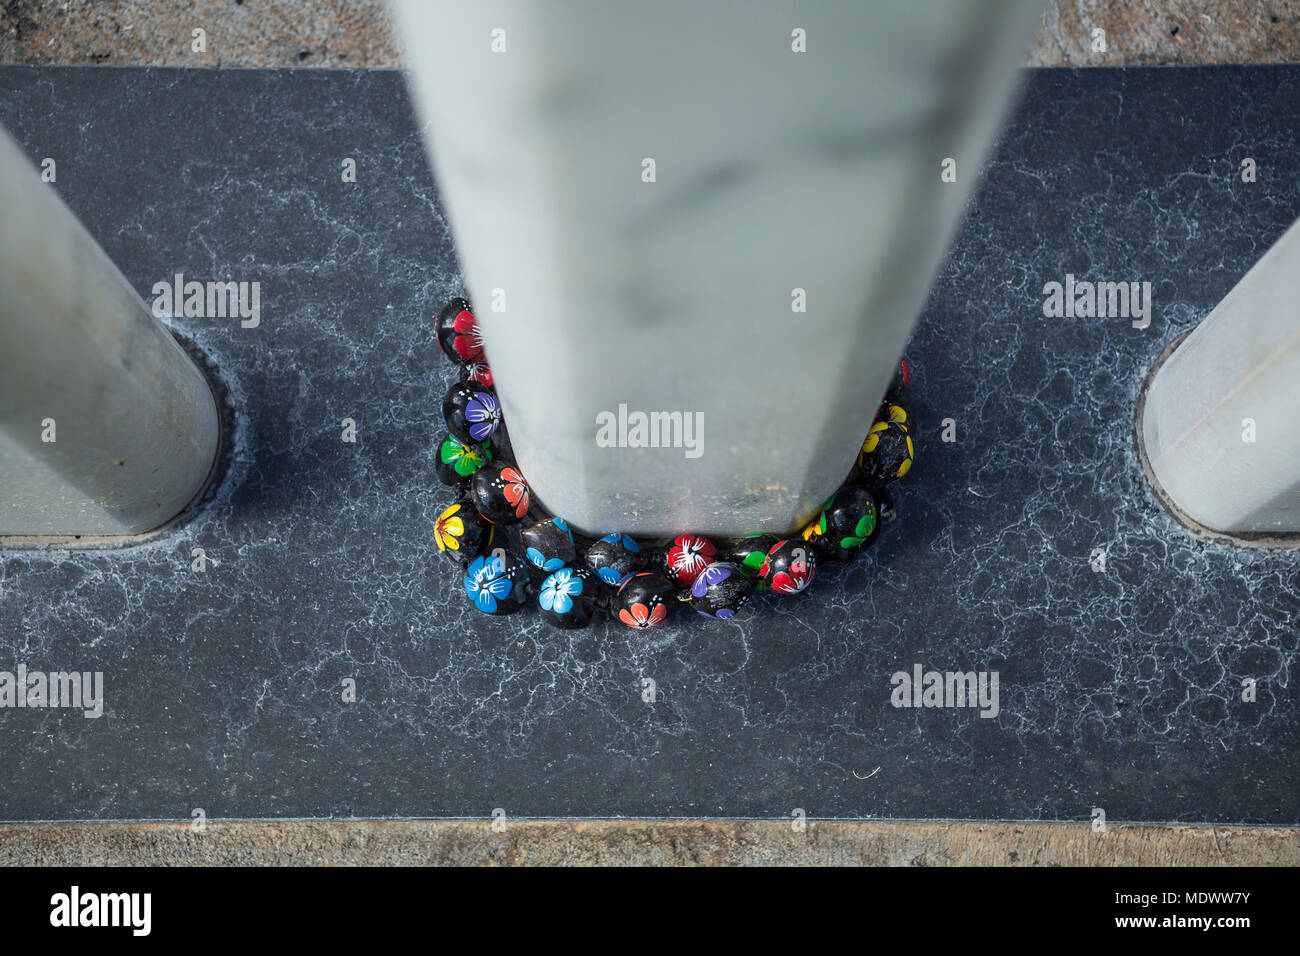 At the close of ceremonies, a Kukui necklace lies around the base of one of the marble monuments dedicated to the Pearl Harbor servicemen who died aboard the USS Oklahoma on December 7, 1940. Kukui were the first prayer beads for the Hawaiian people and are in use today. Stock Photo